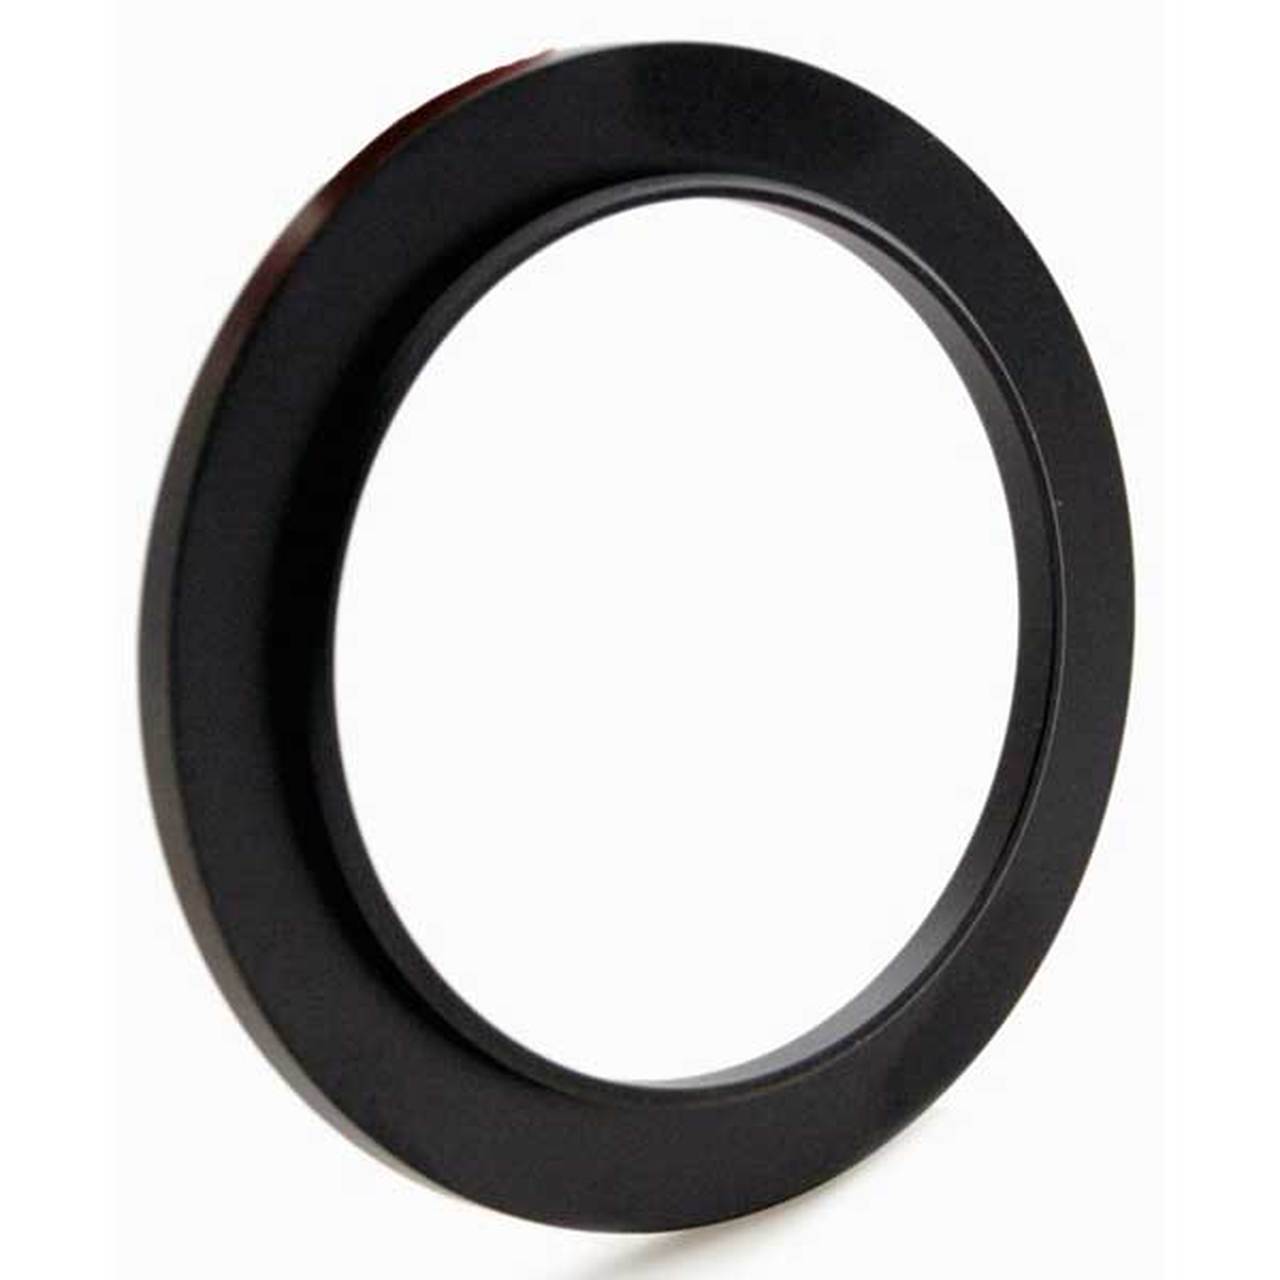 Promaster 7029 39-52mm Step-Up Ring